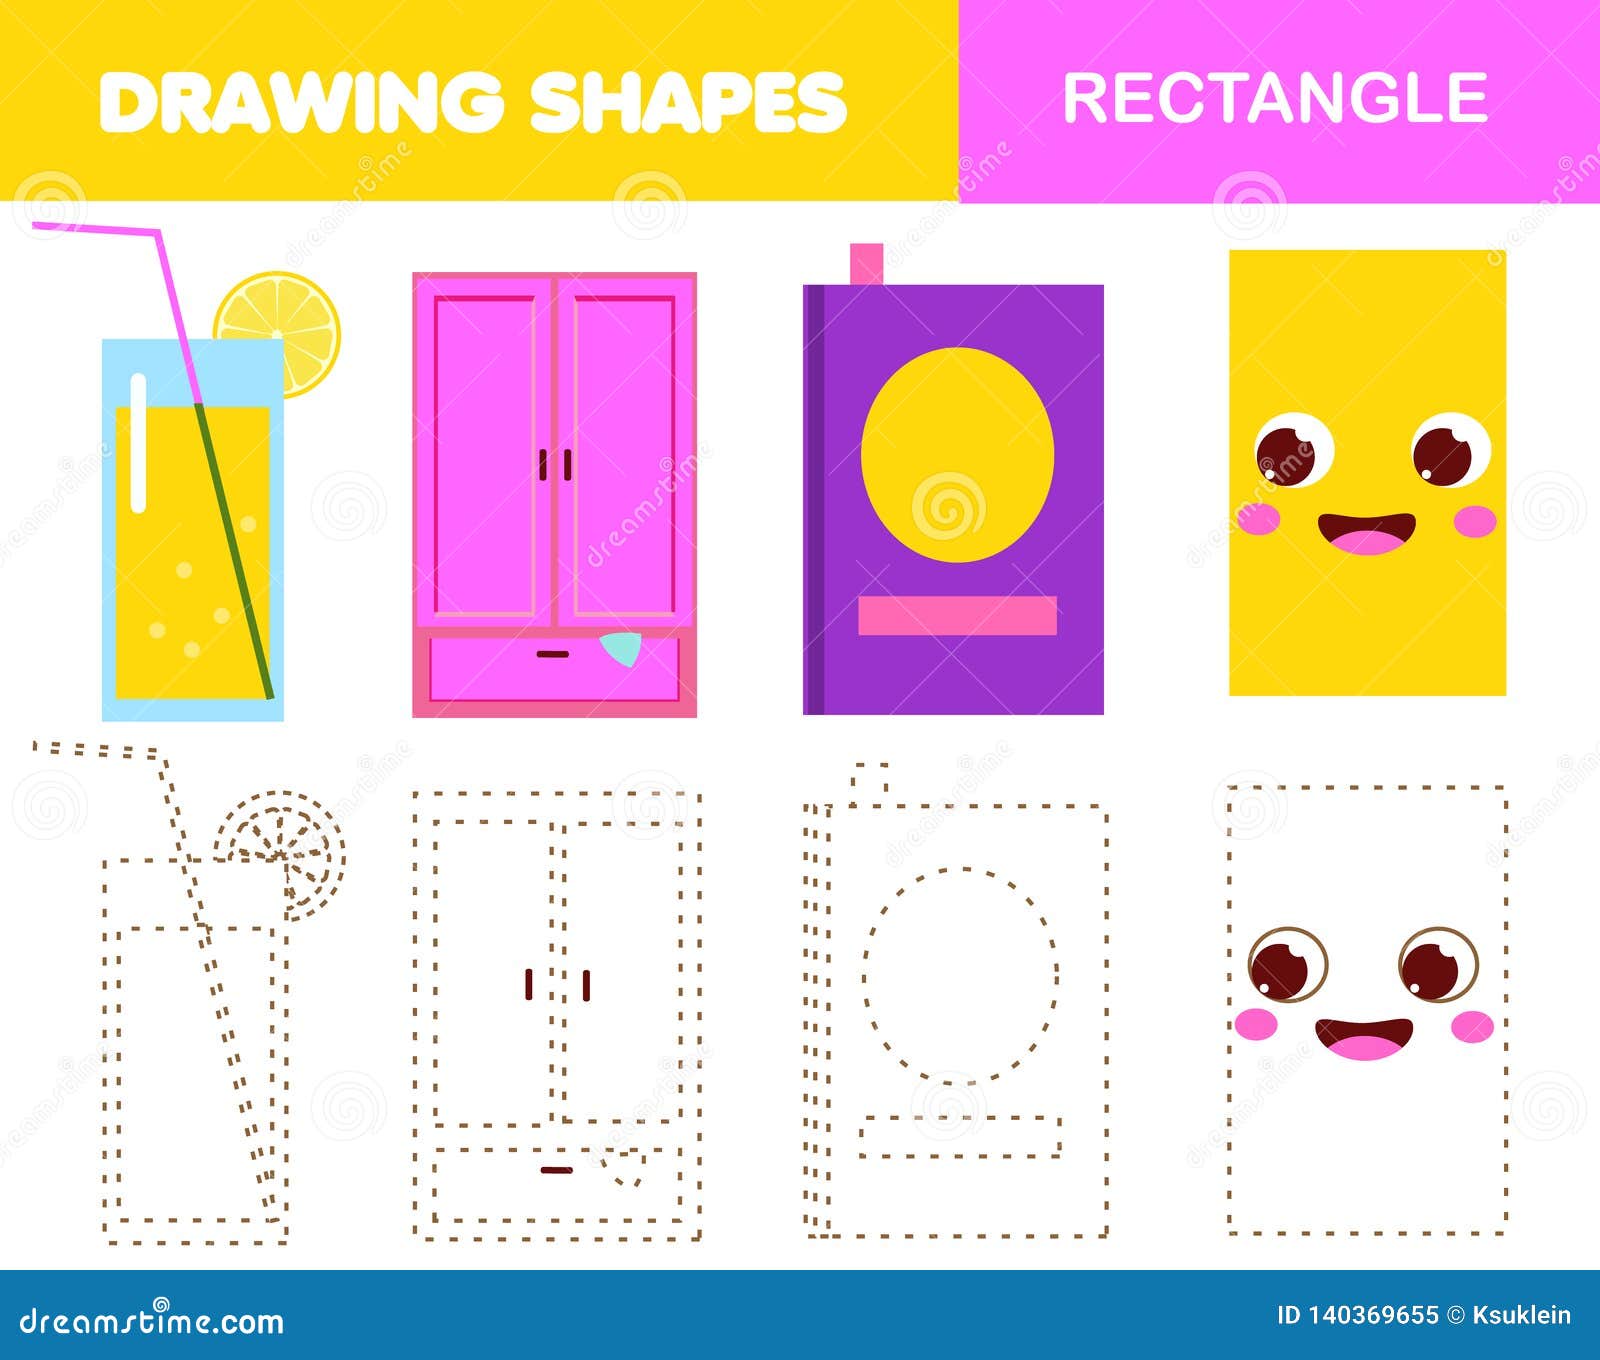 rectangle pictures for kids